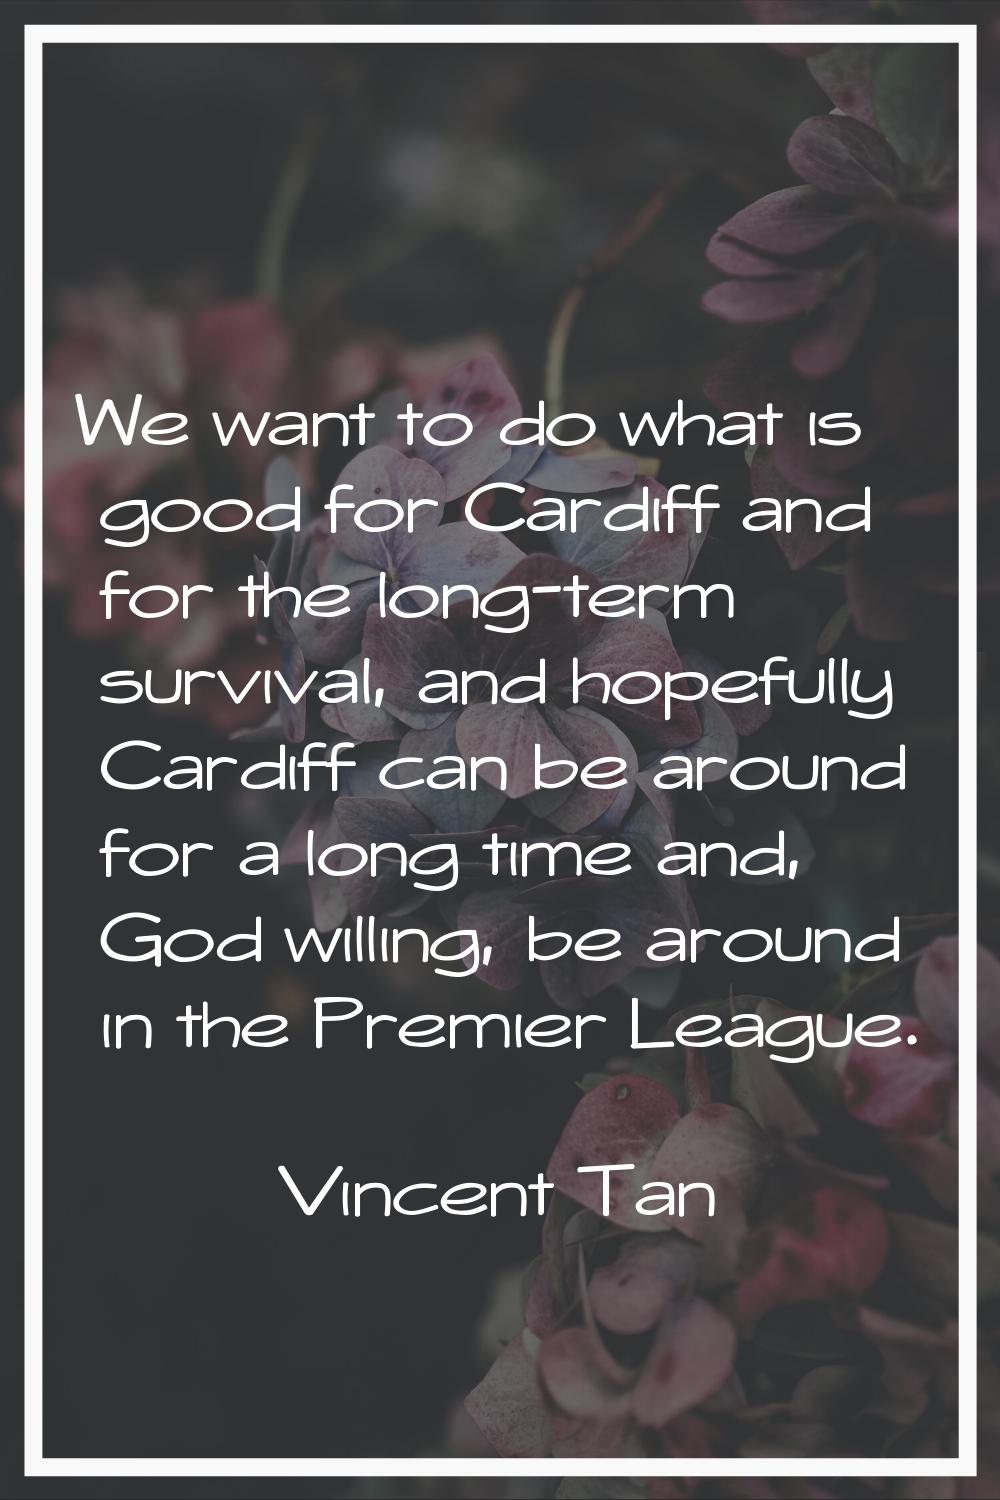 We want to do what is good for Cardiff and for the long-term survival, and hopefully Cardiff can be